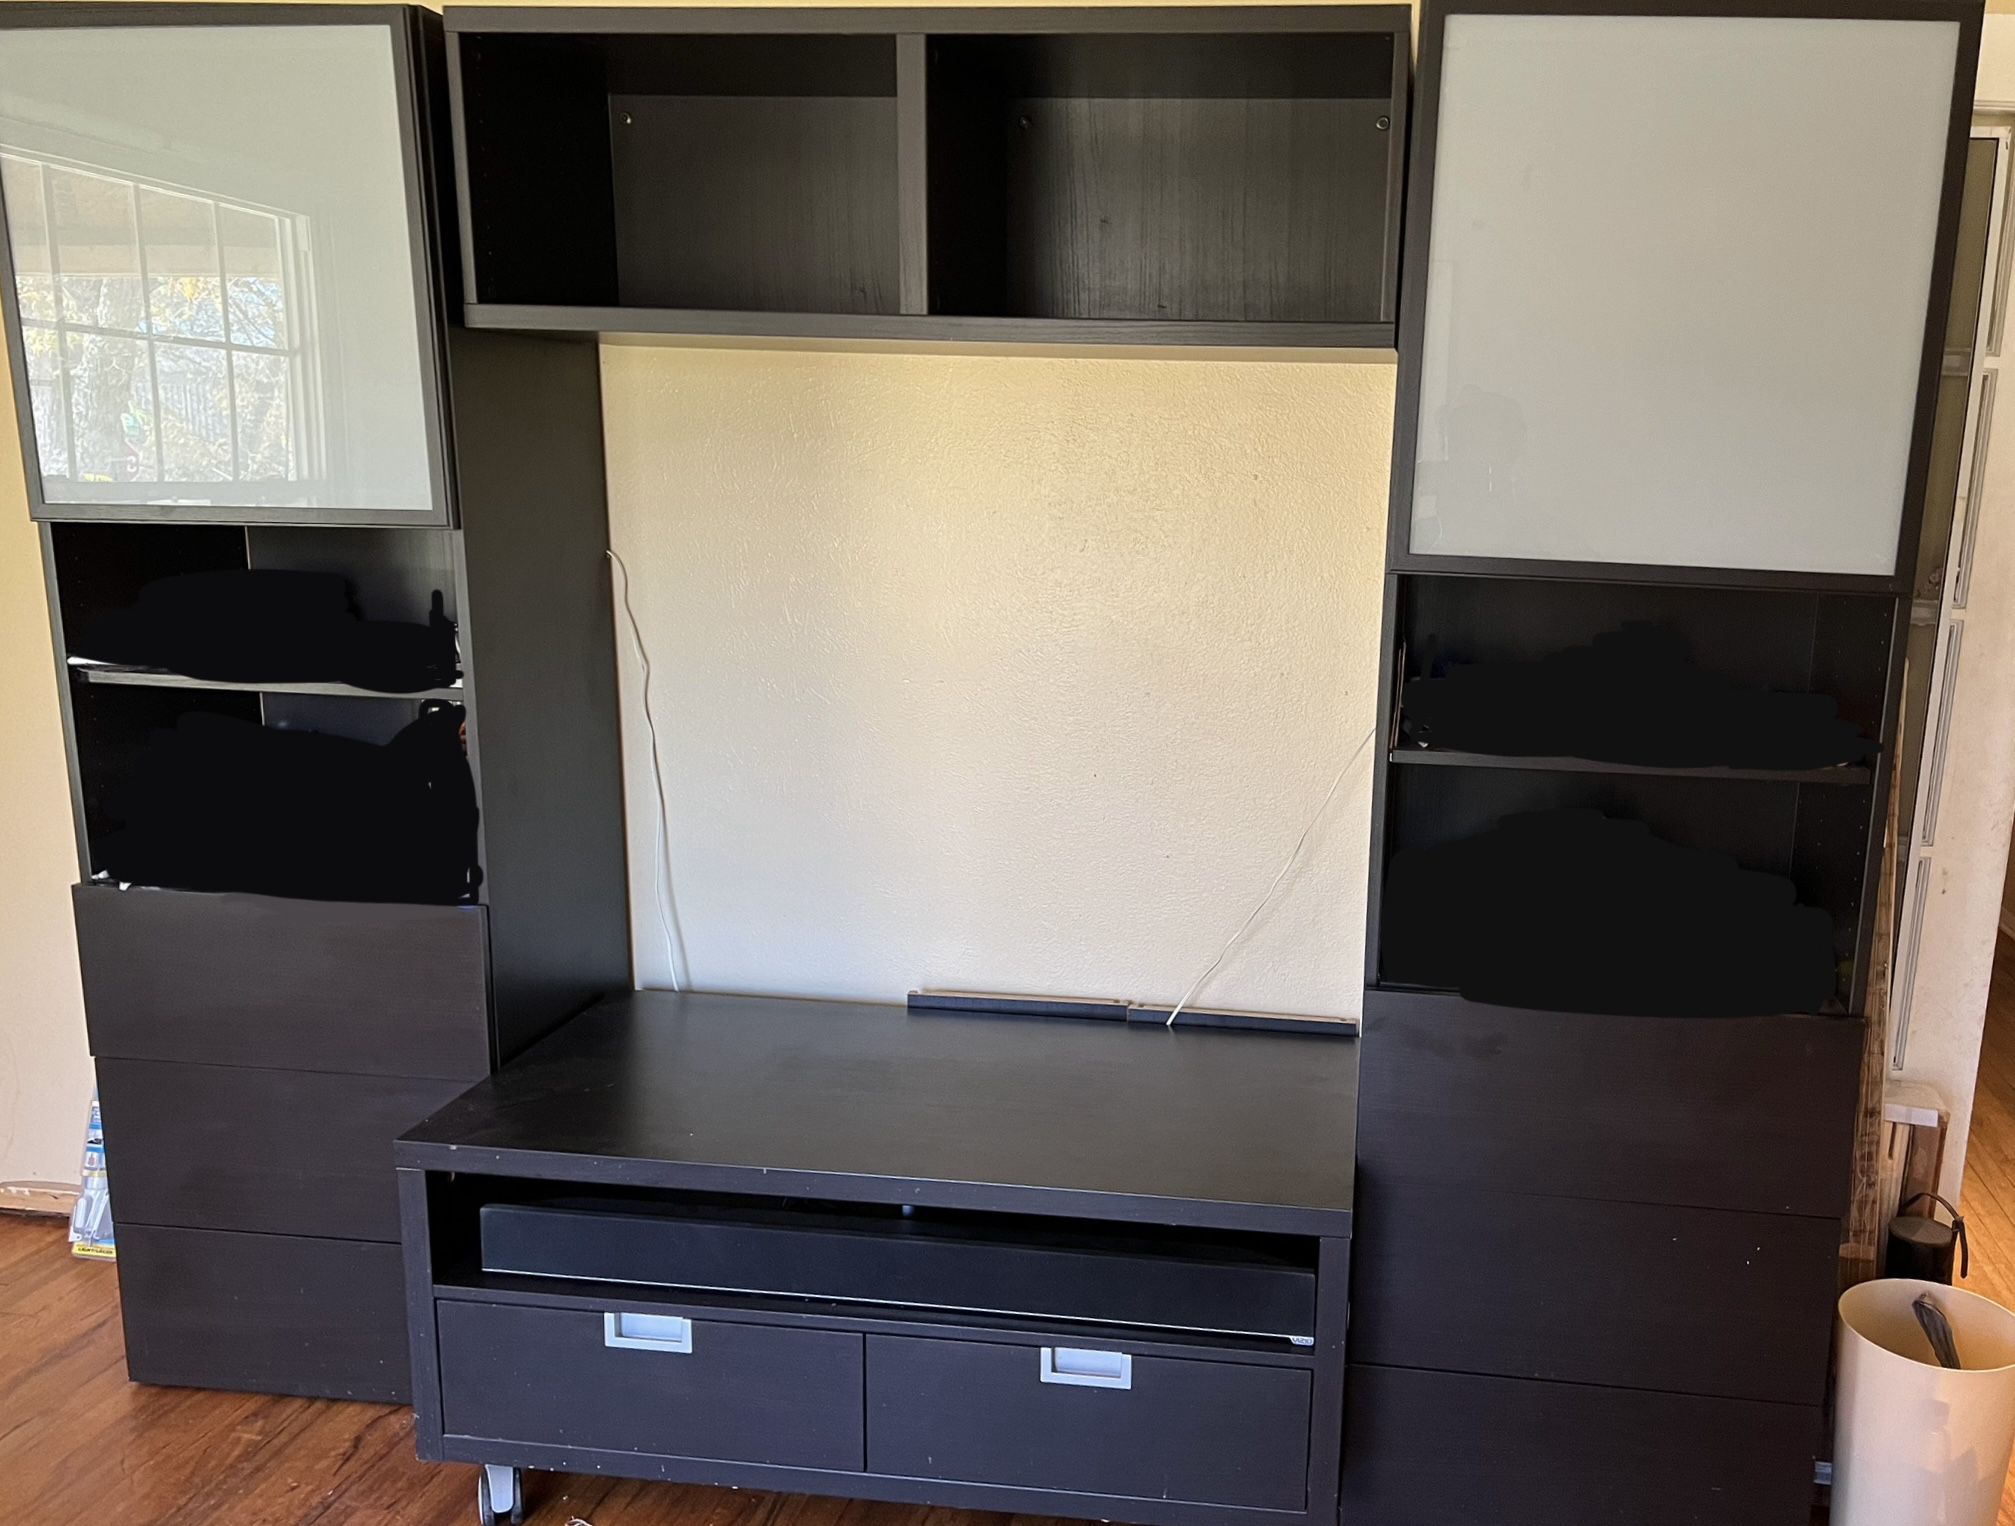 IKEA TV Storage/Center With Cabinets